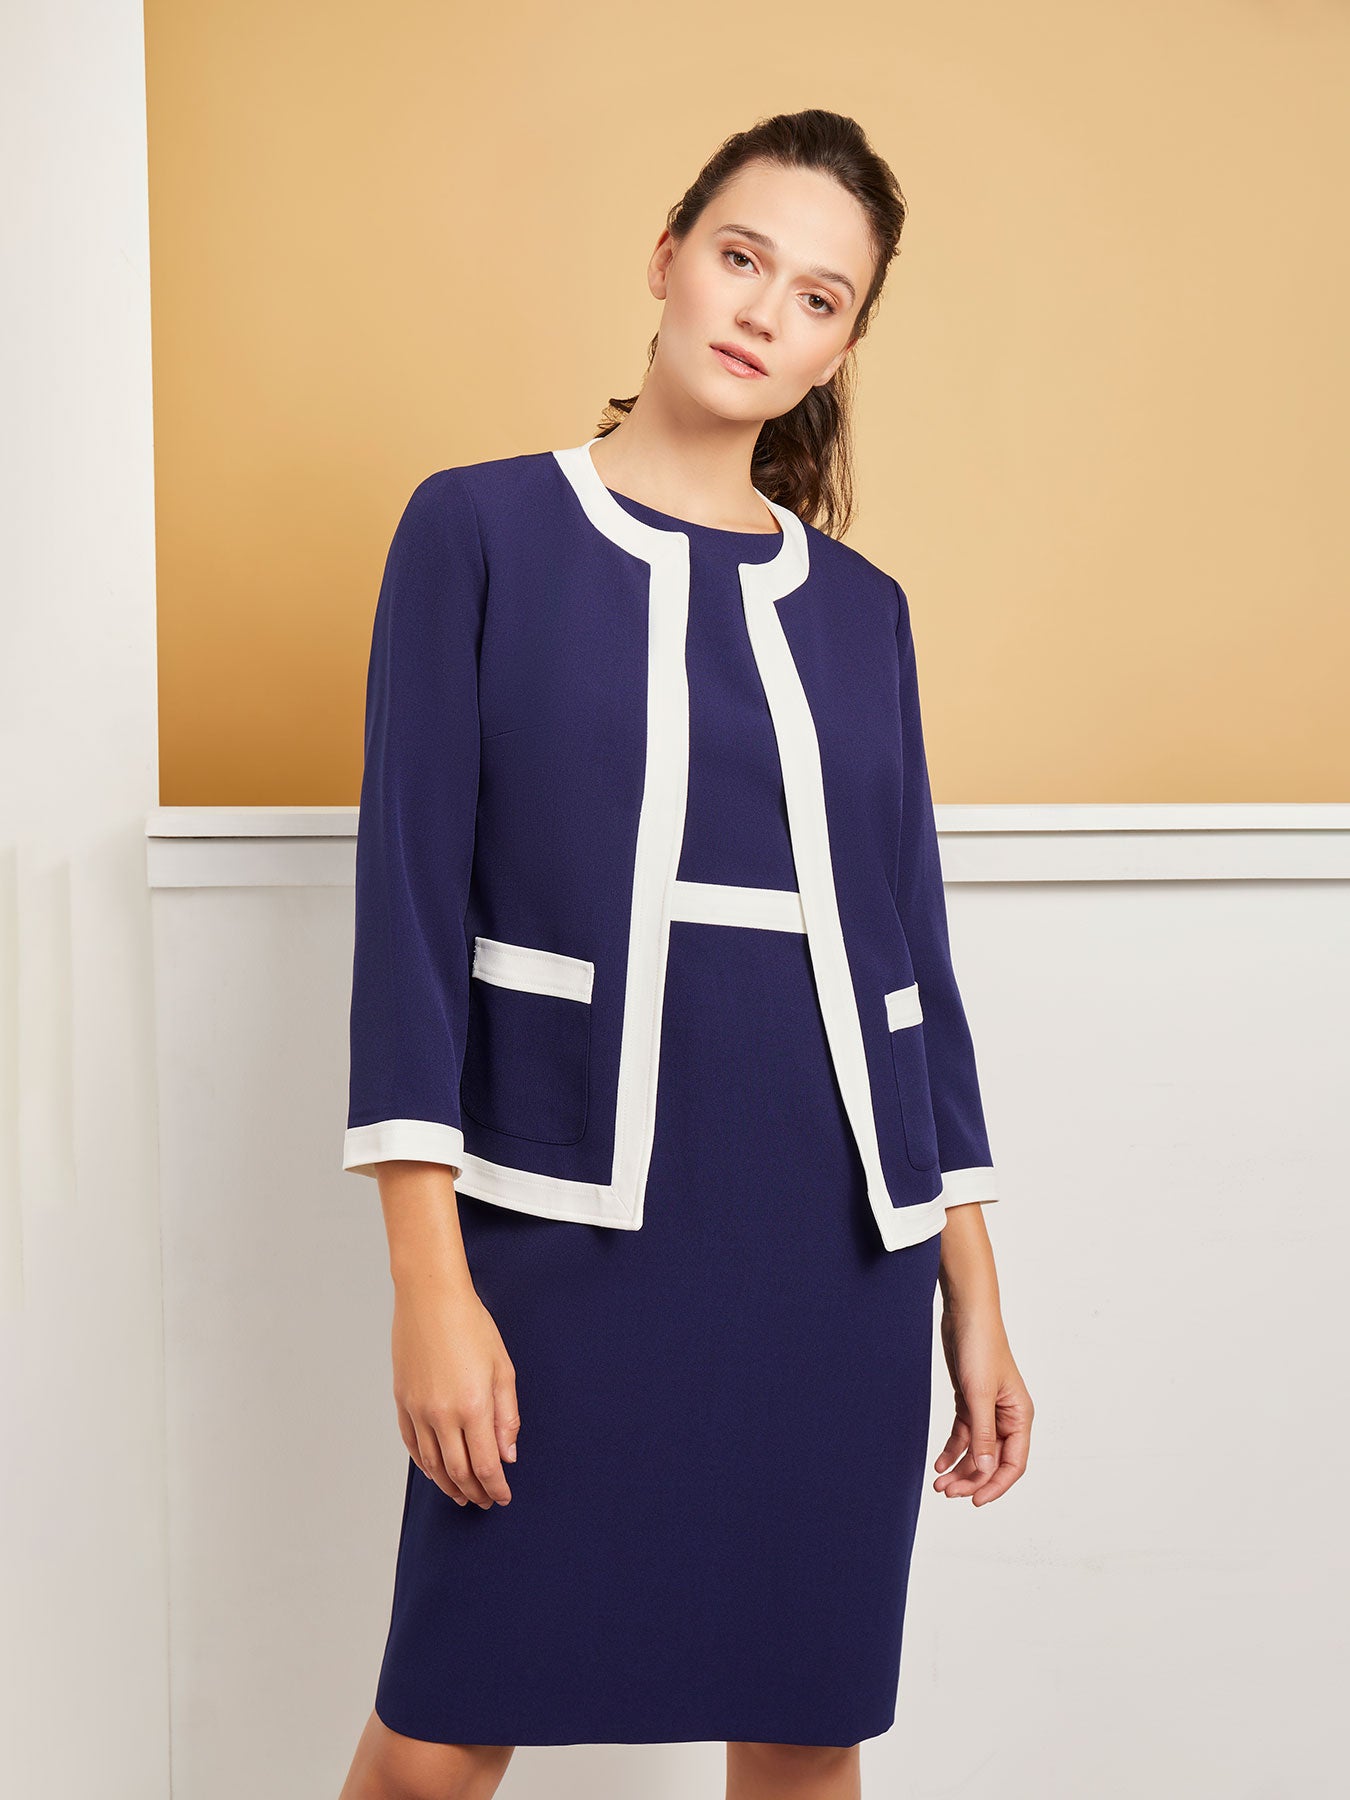 Missy & Petite Executive Collection Single-Button A-Line Skirt Suit,  Created for Macy's